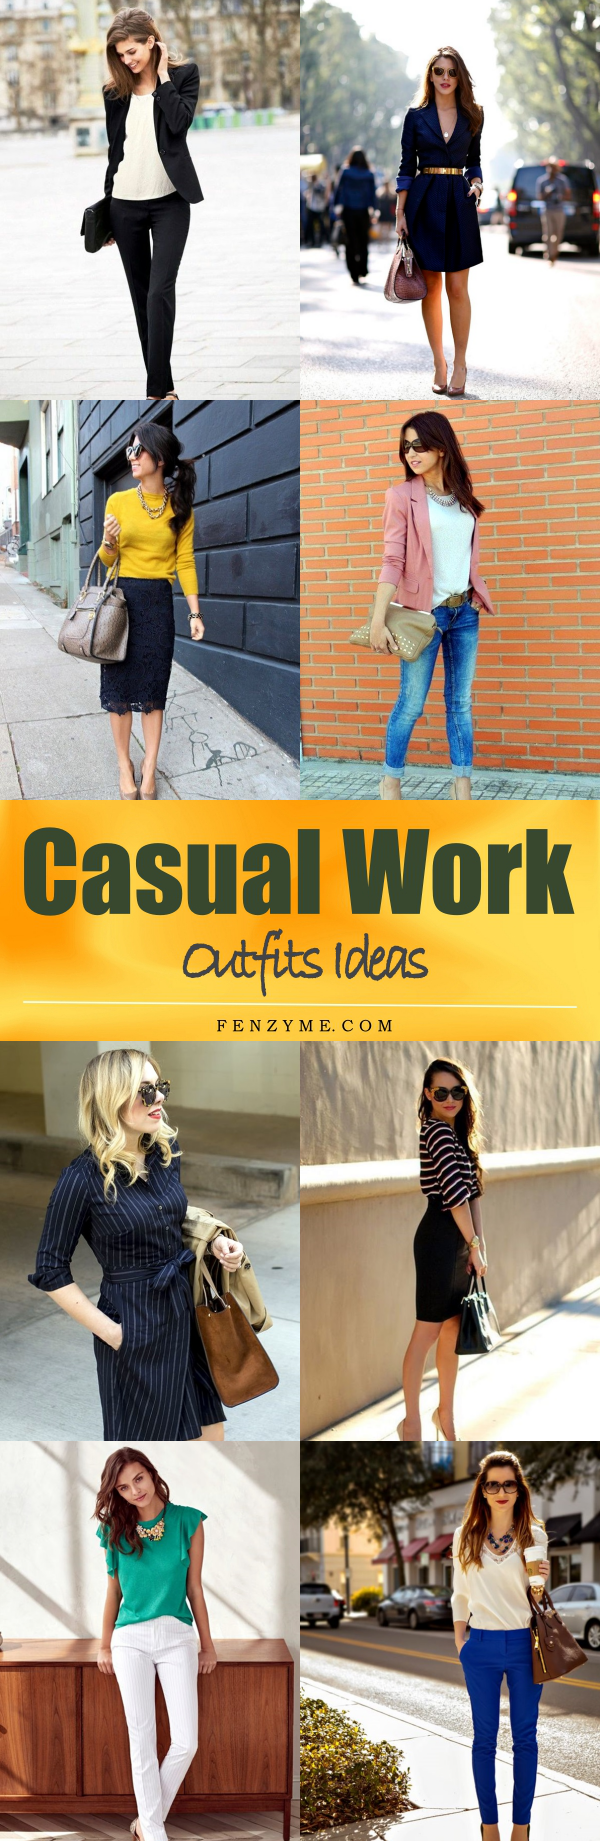 casual-work-outfits-ideas-007